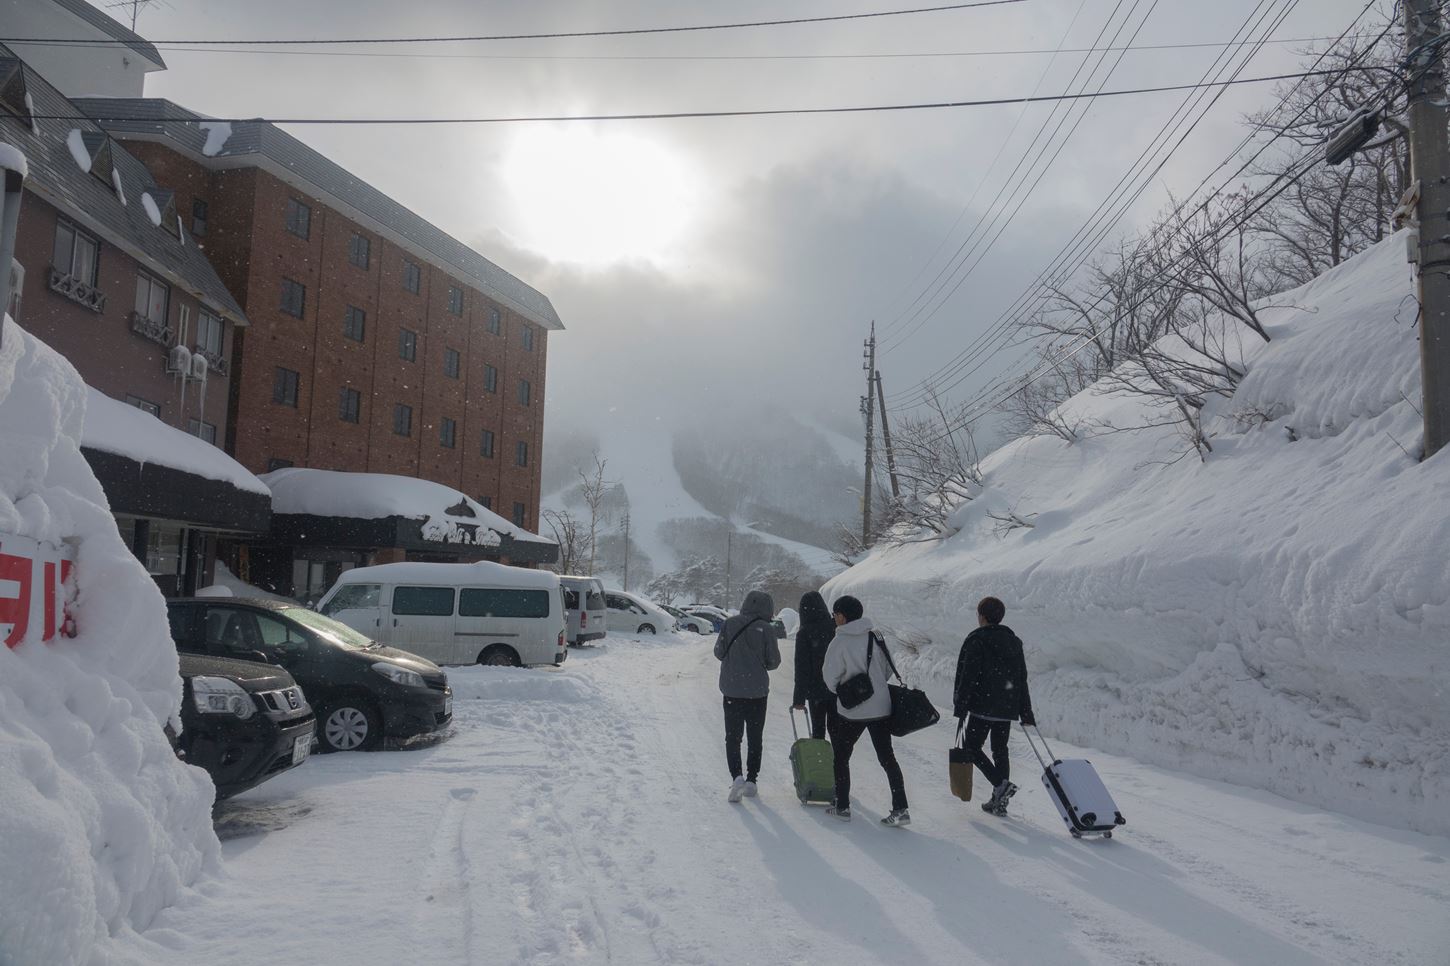 Sightseeing scenery that simply shows the weather in Nagano in February4